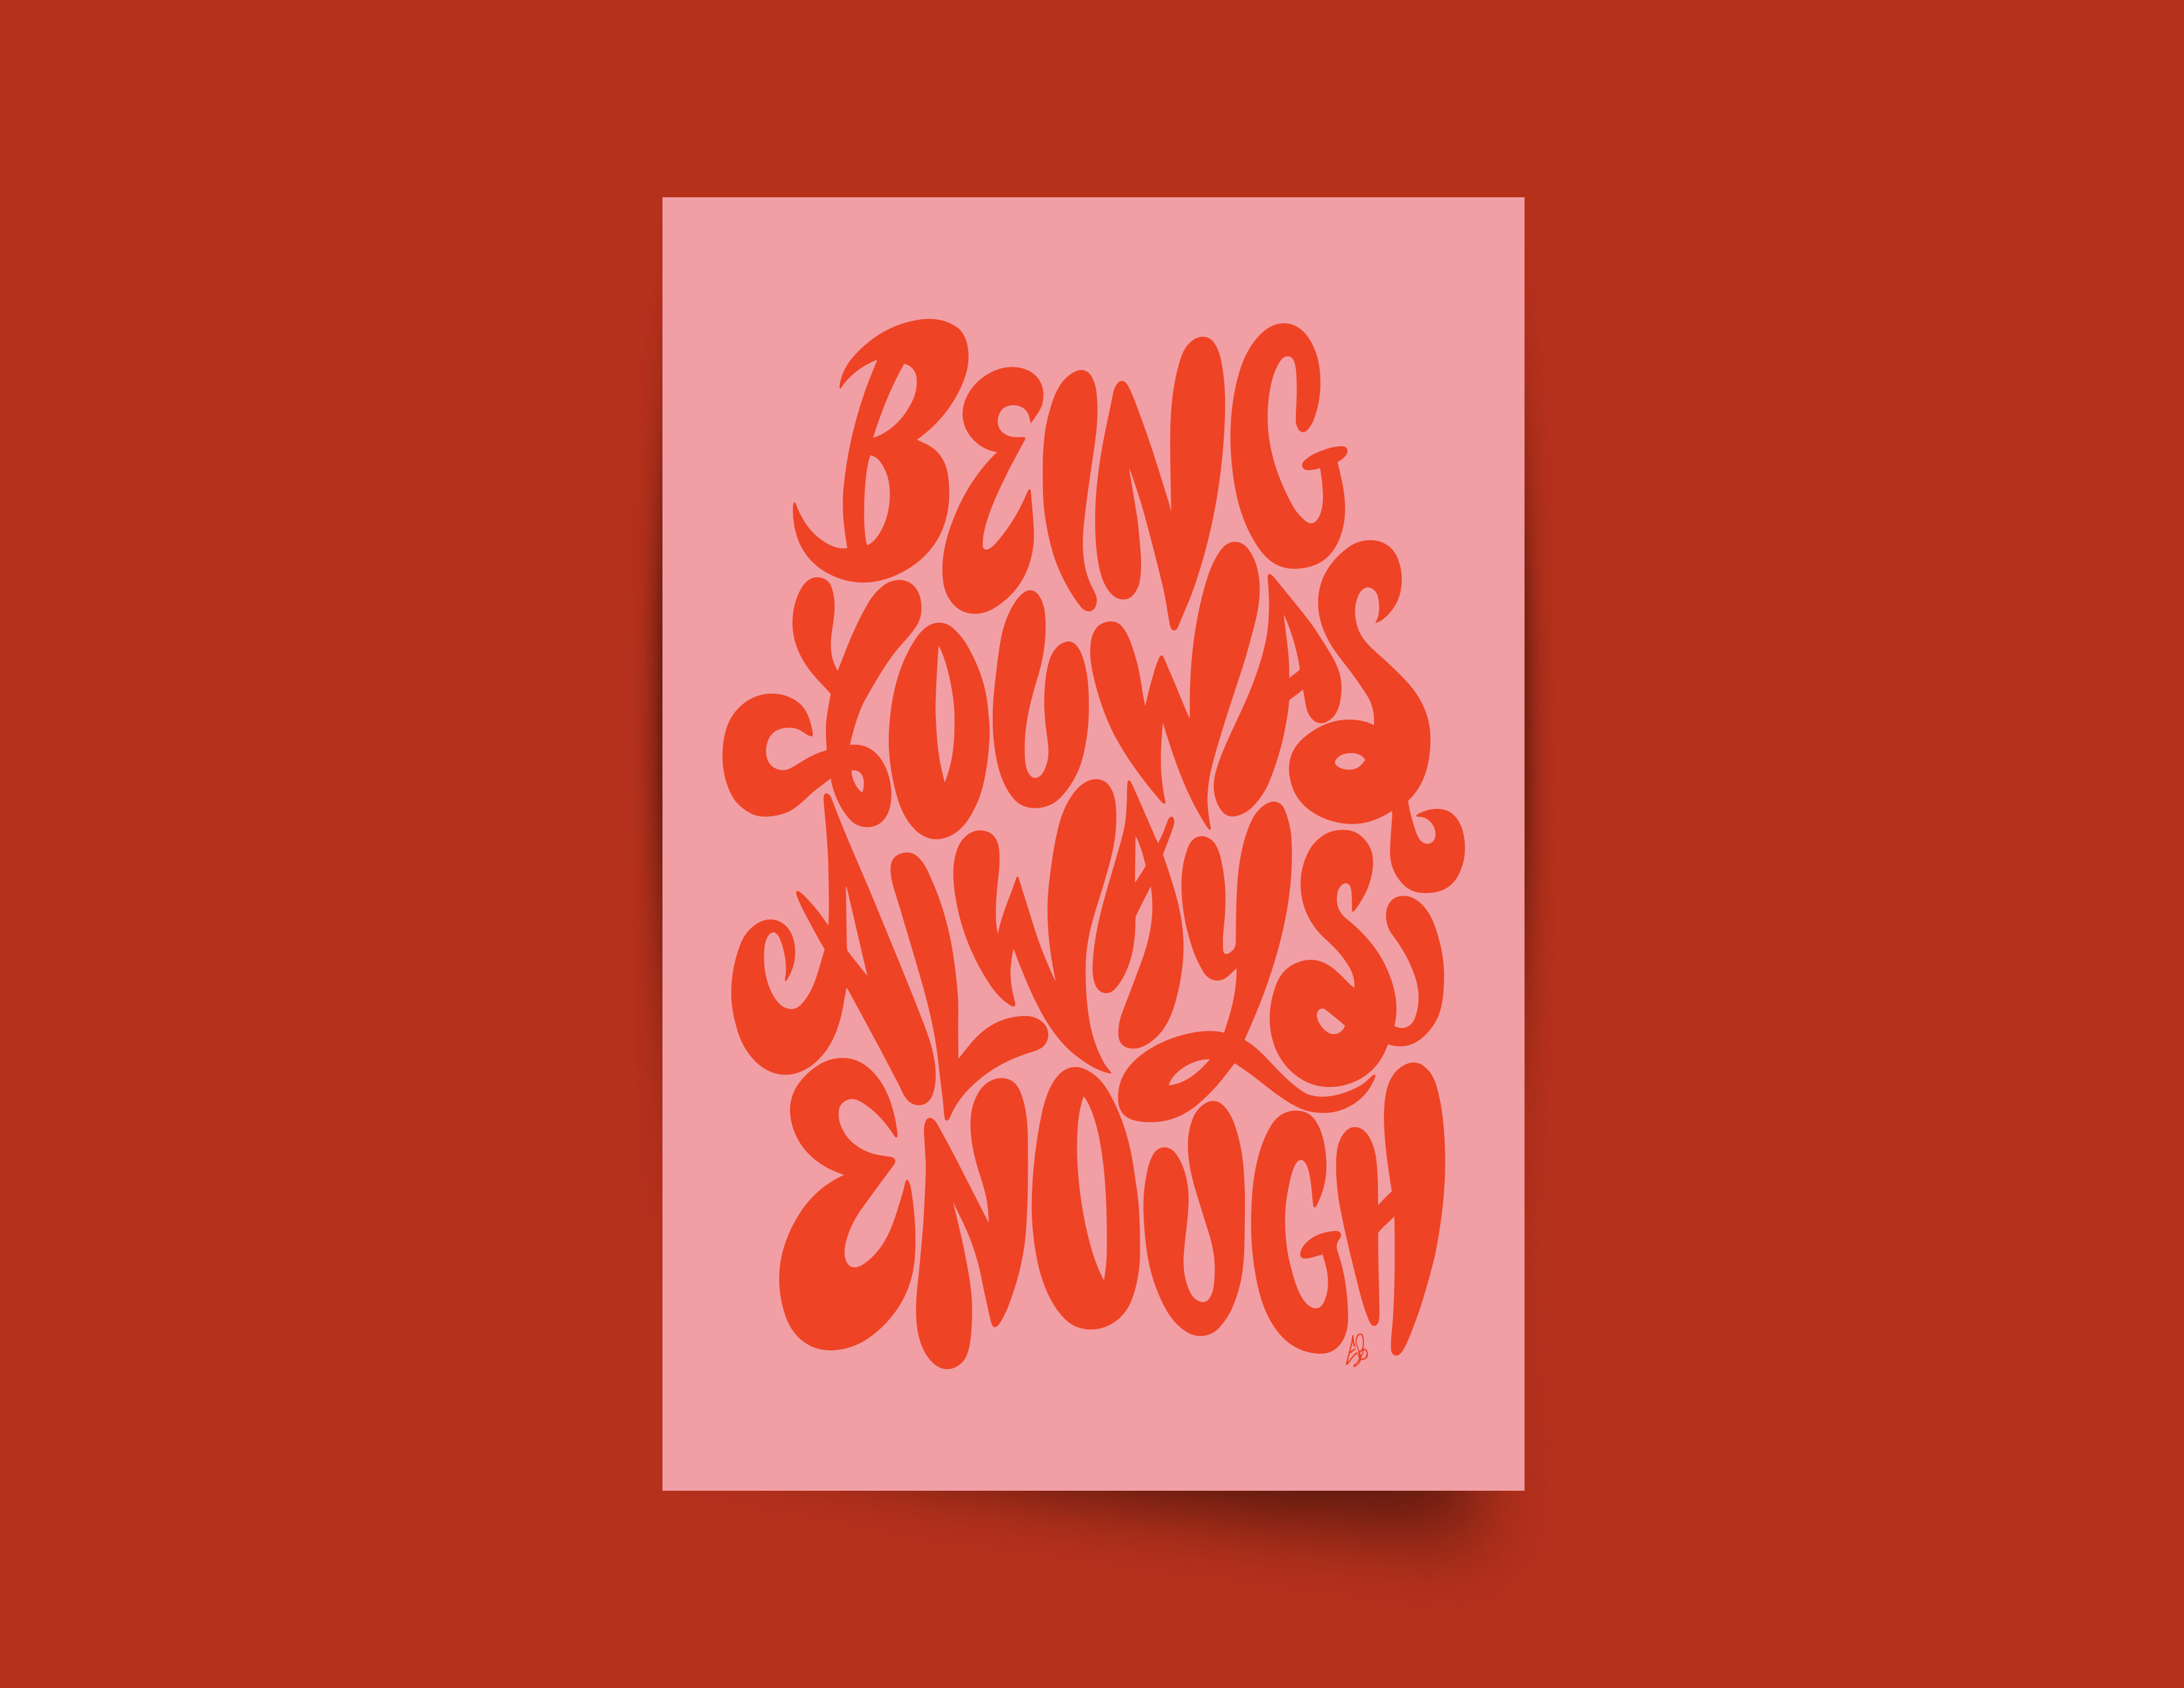 A pink print with the worlds "Being you was always enough." handlettered in red